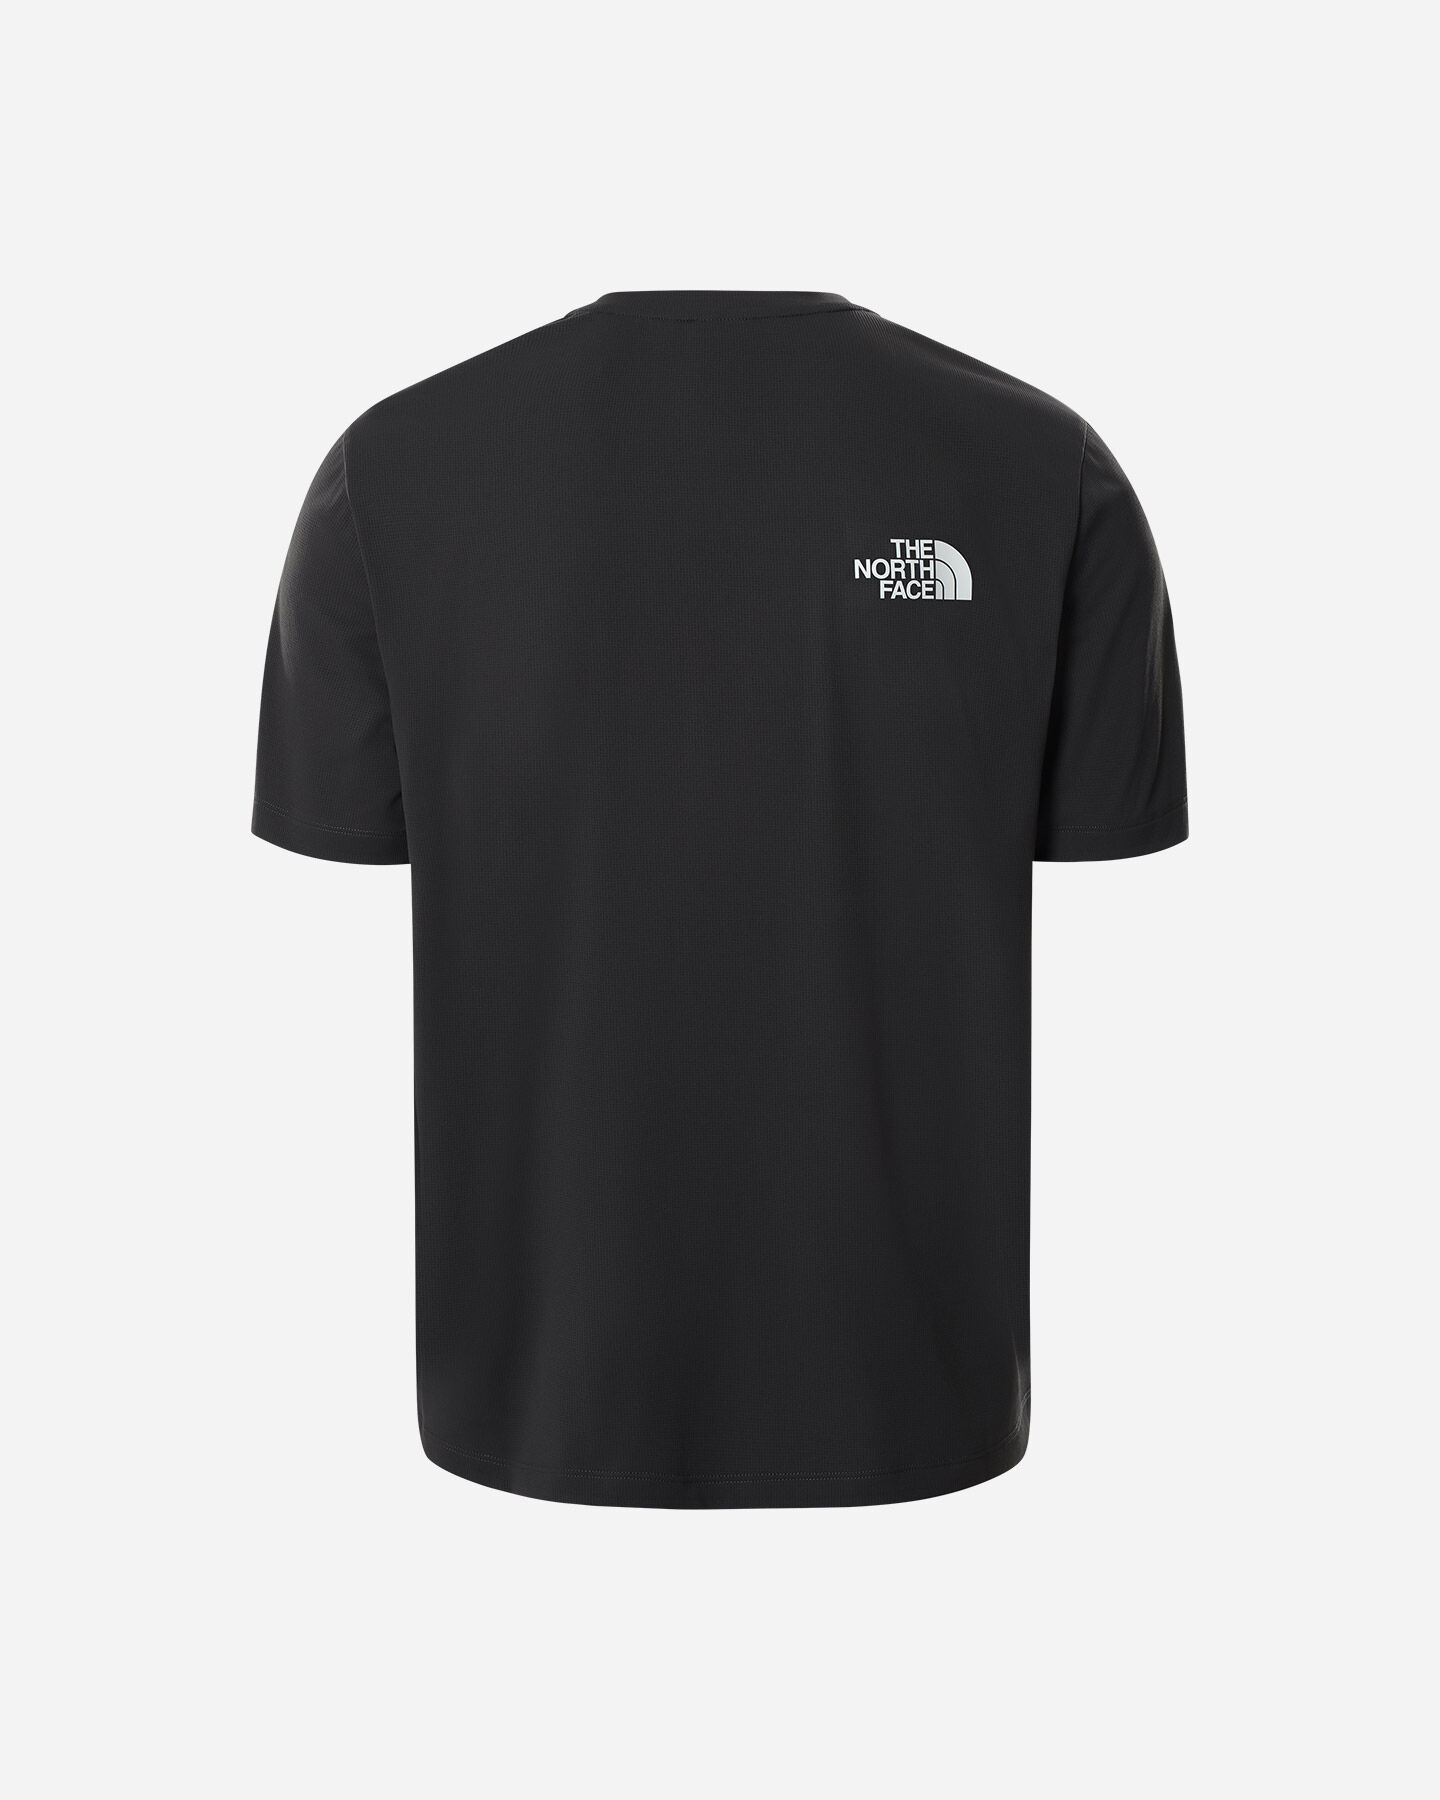  T-Shirt THE NORTH FACE HYBRID M S5348789|MN8|XS scatto 1